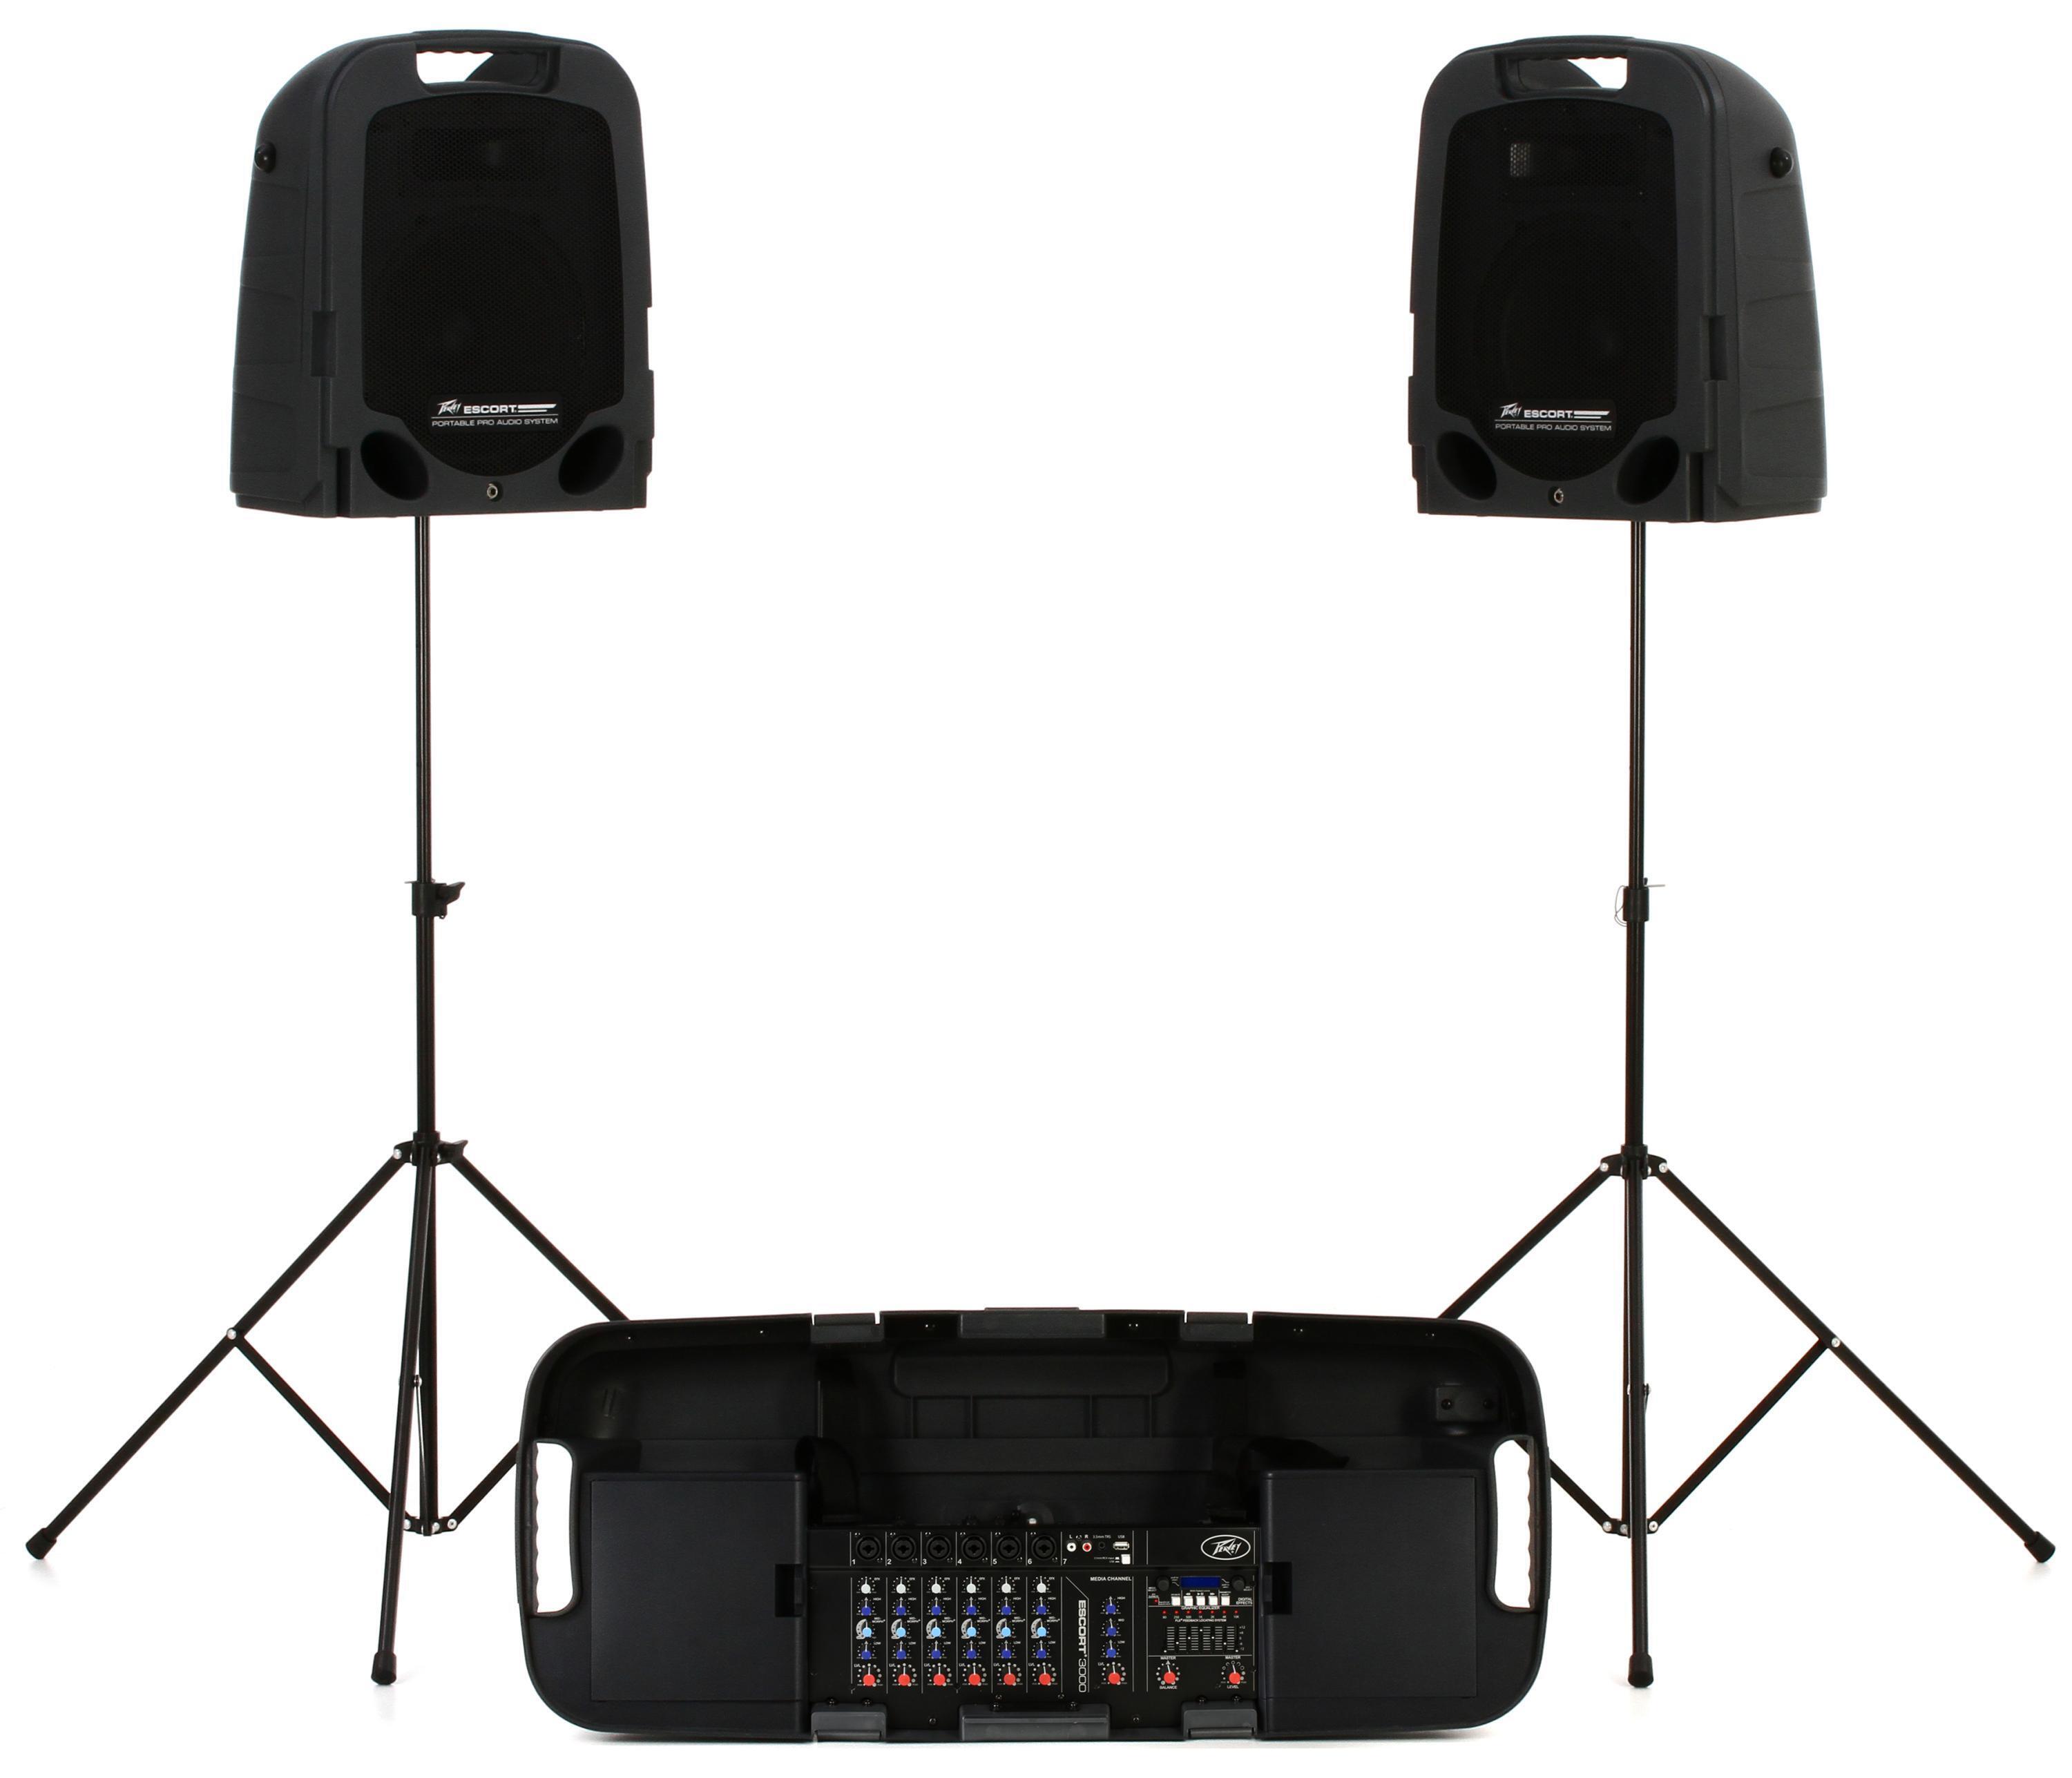 Peavey Escort 3000 Portable PA System | Sweetwater